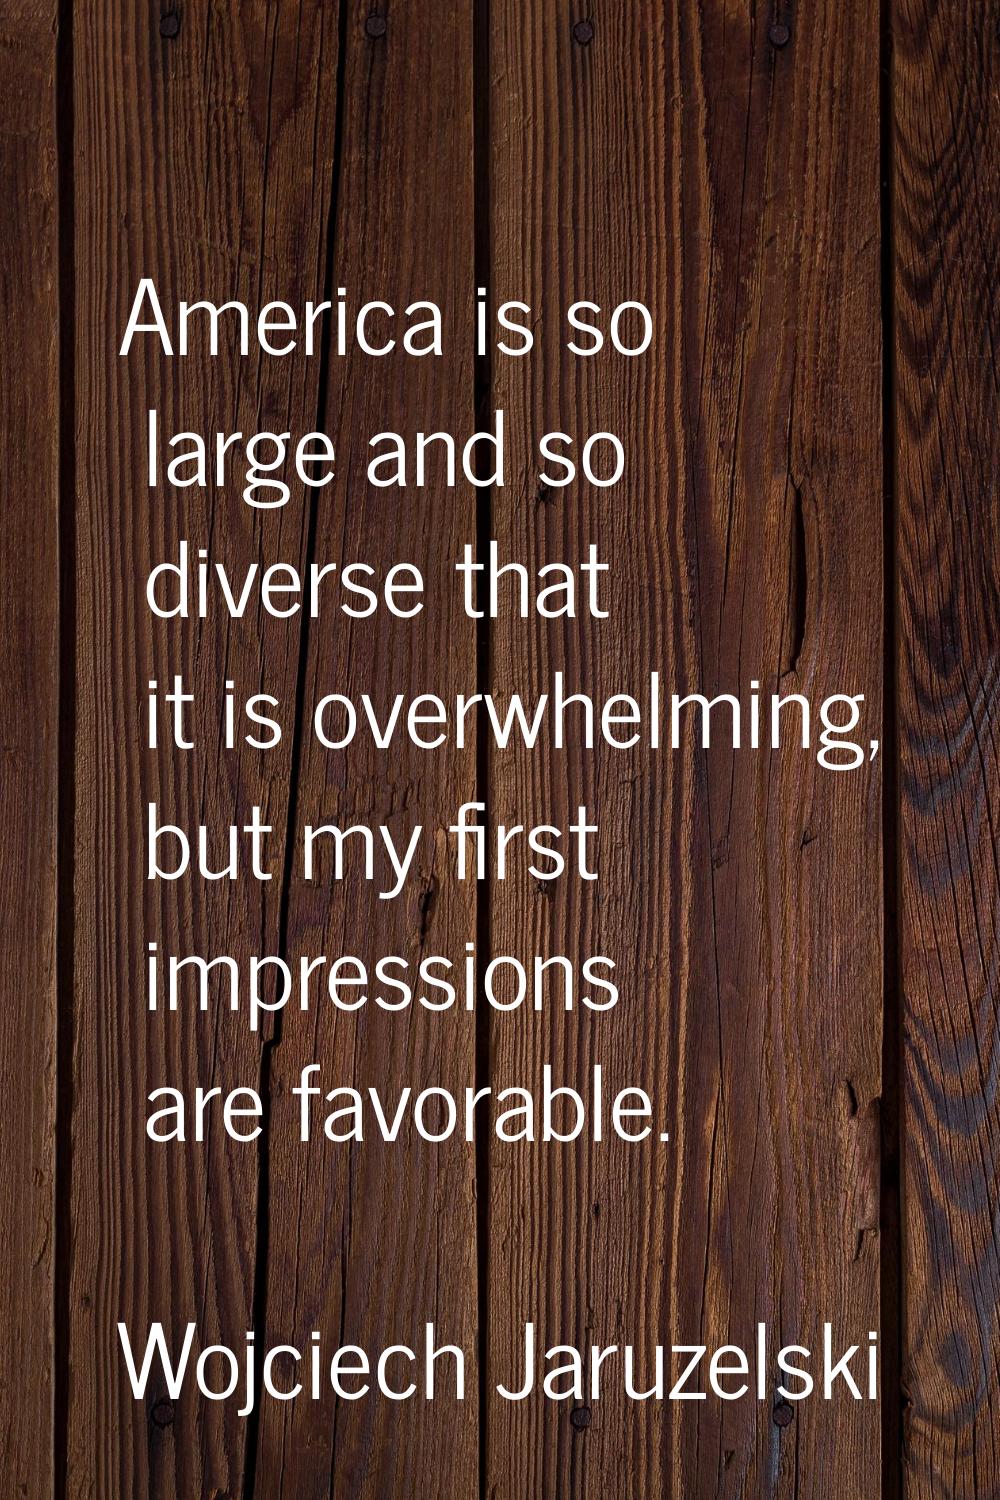 America is so large and so diverse that it is overwhelming, but my first impressions are favorable.